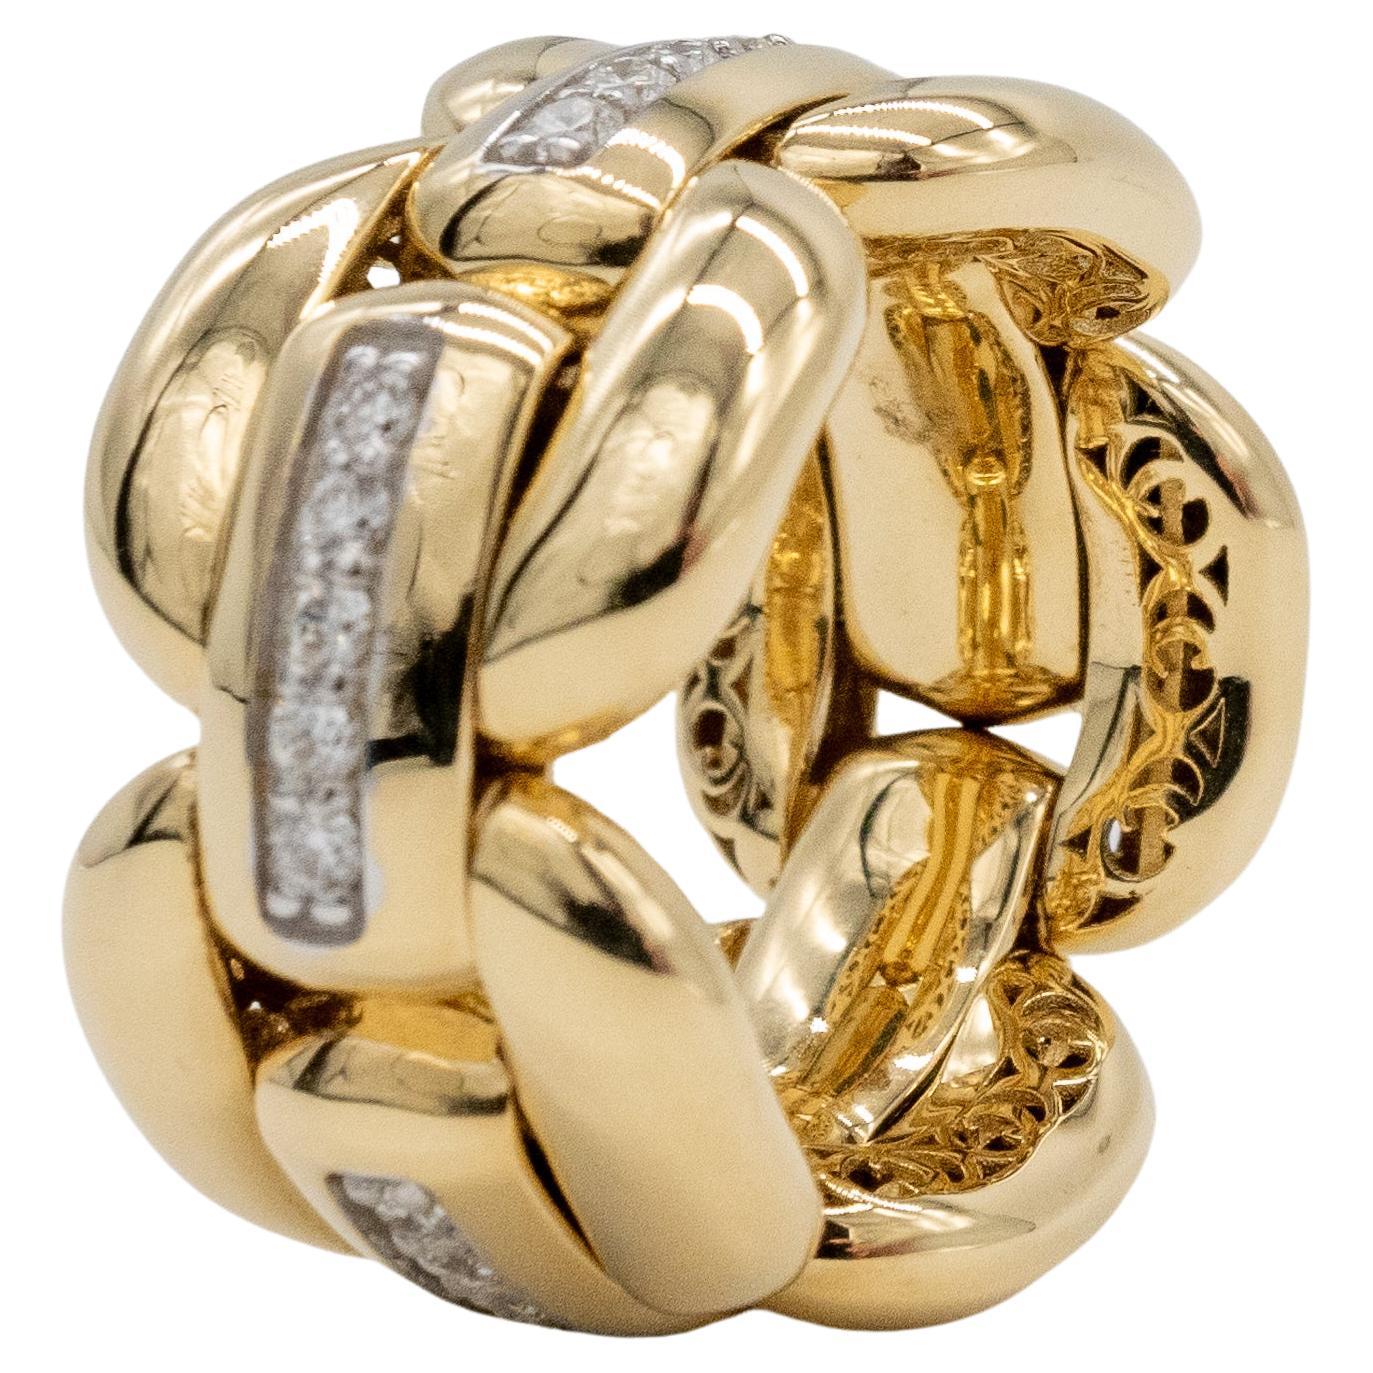 Gold Ring and Articulated Diamonds
we love the ease of use of this articulated ring.
it's flexible in size and can be worn on different fingers.
it is in 18-carat yellow gold and weighs 15.20 grams
 of gold. it is set with 0.55 carat Gvs diamonds.